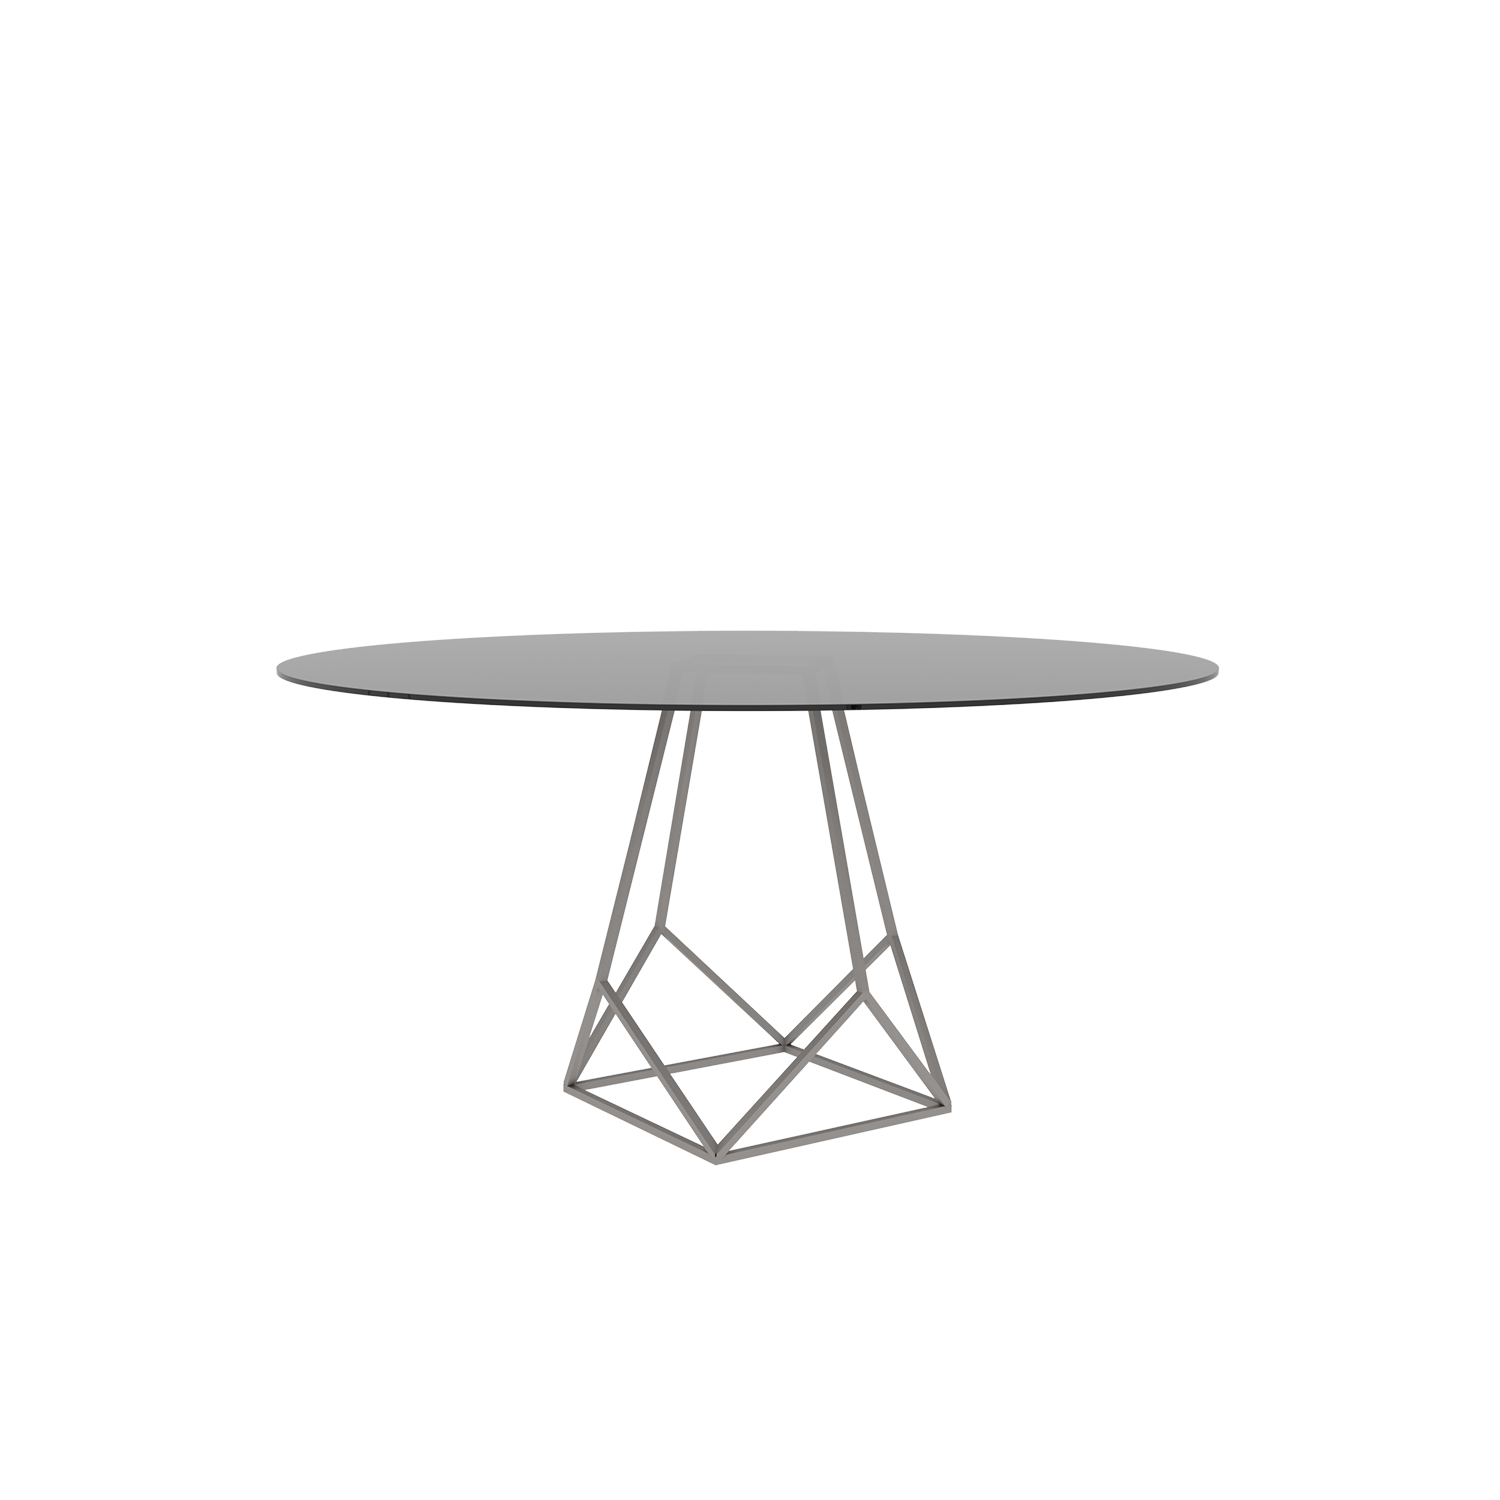 Annette Round Dining Table | Coleccion Alexandra | dining tables | annette-round-dining-table